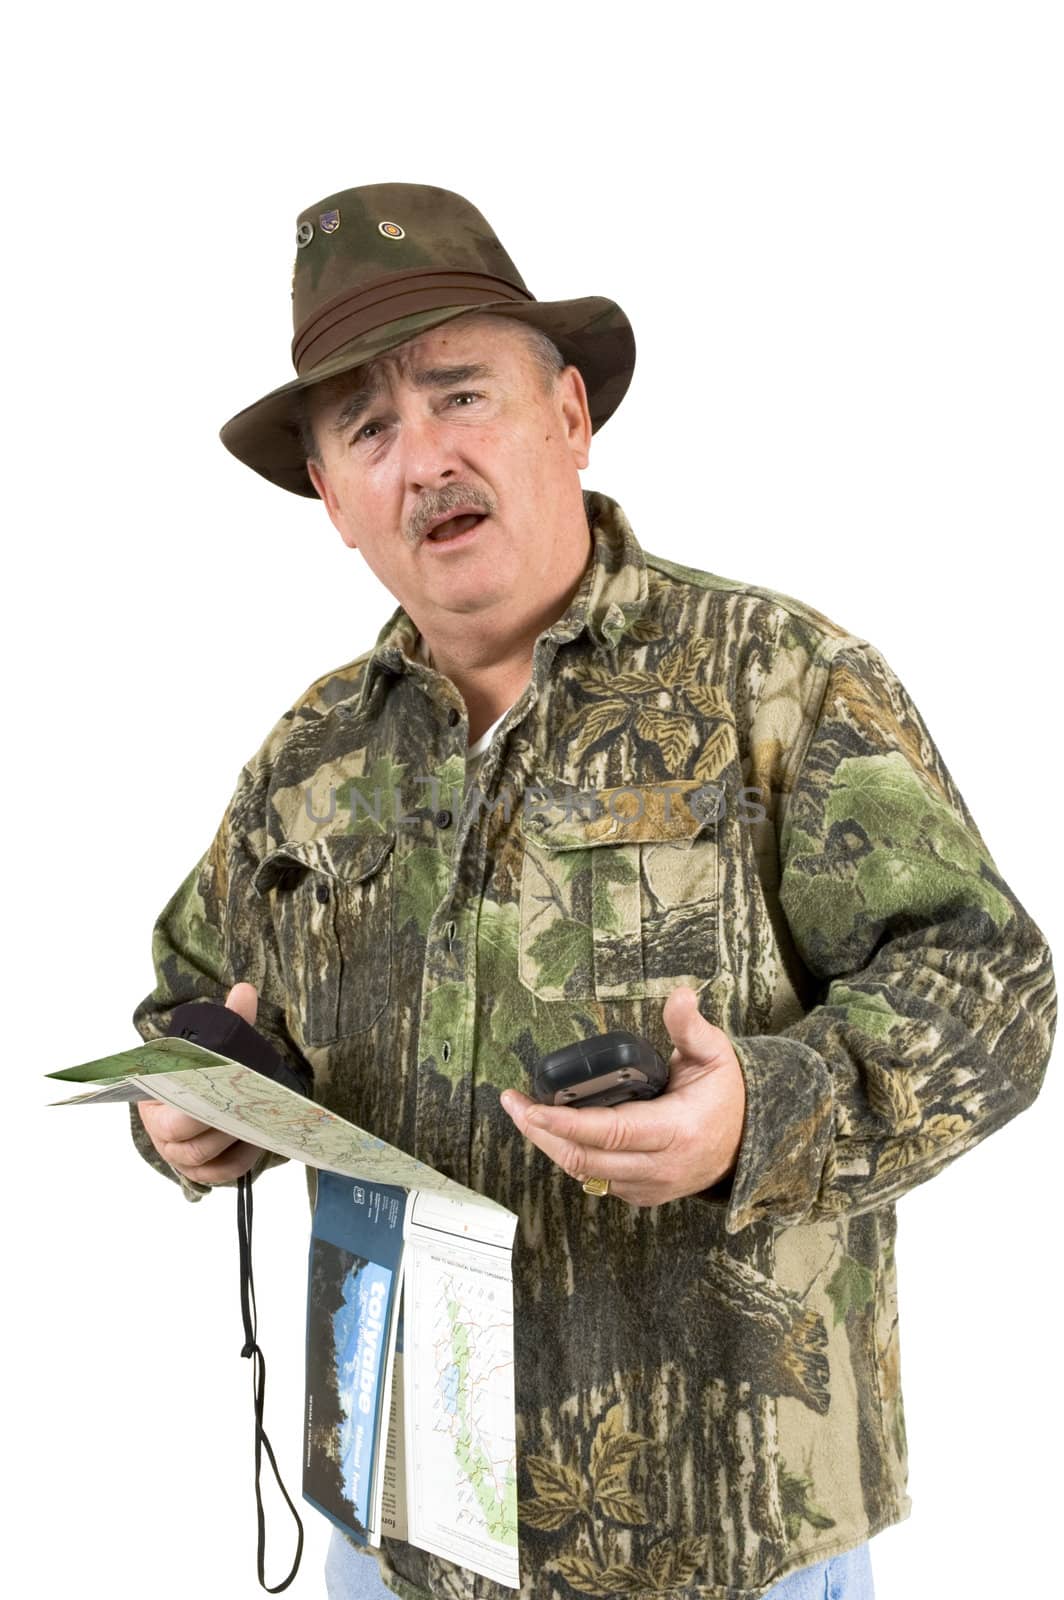 Man in Camouflage clothing using national forest maps and two gps's and still lost on a white background